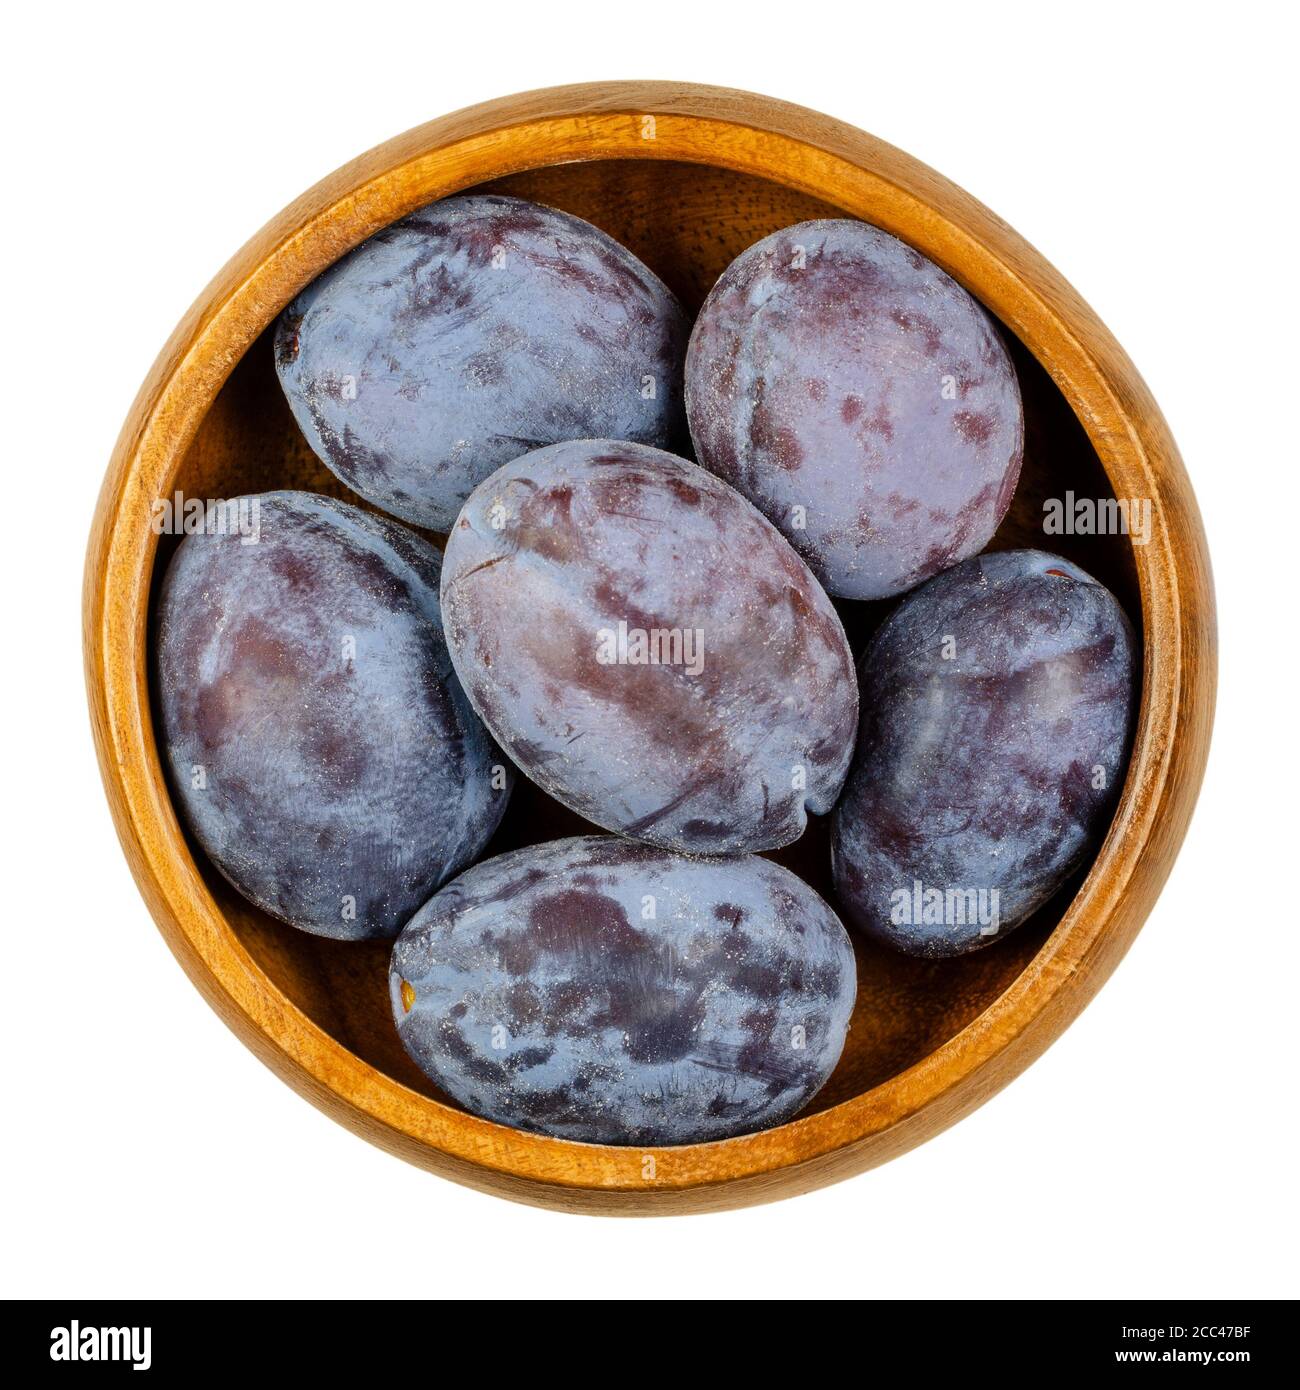 Zwetschge. Ripe European plums in wooden bowl. Freestone fruit with purple and violet skin. Popular seasonal table fruit in Central Europe. Prunus. Stock Photo